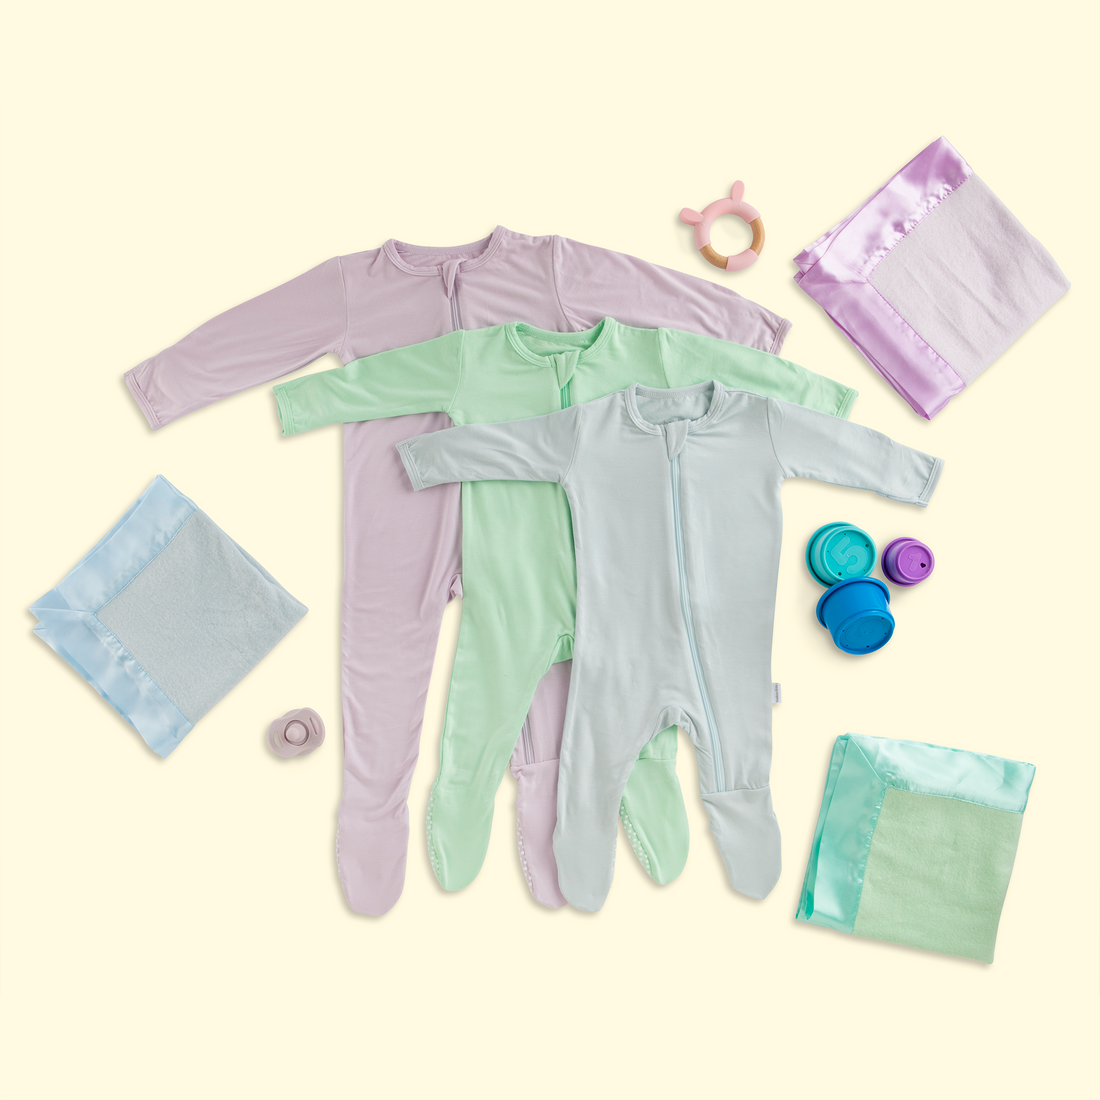 5 Reasons Why Bamboo Baby Clothes are the Best for Baby